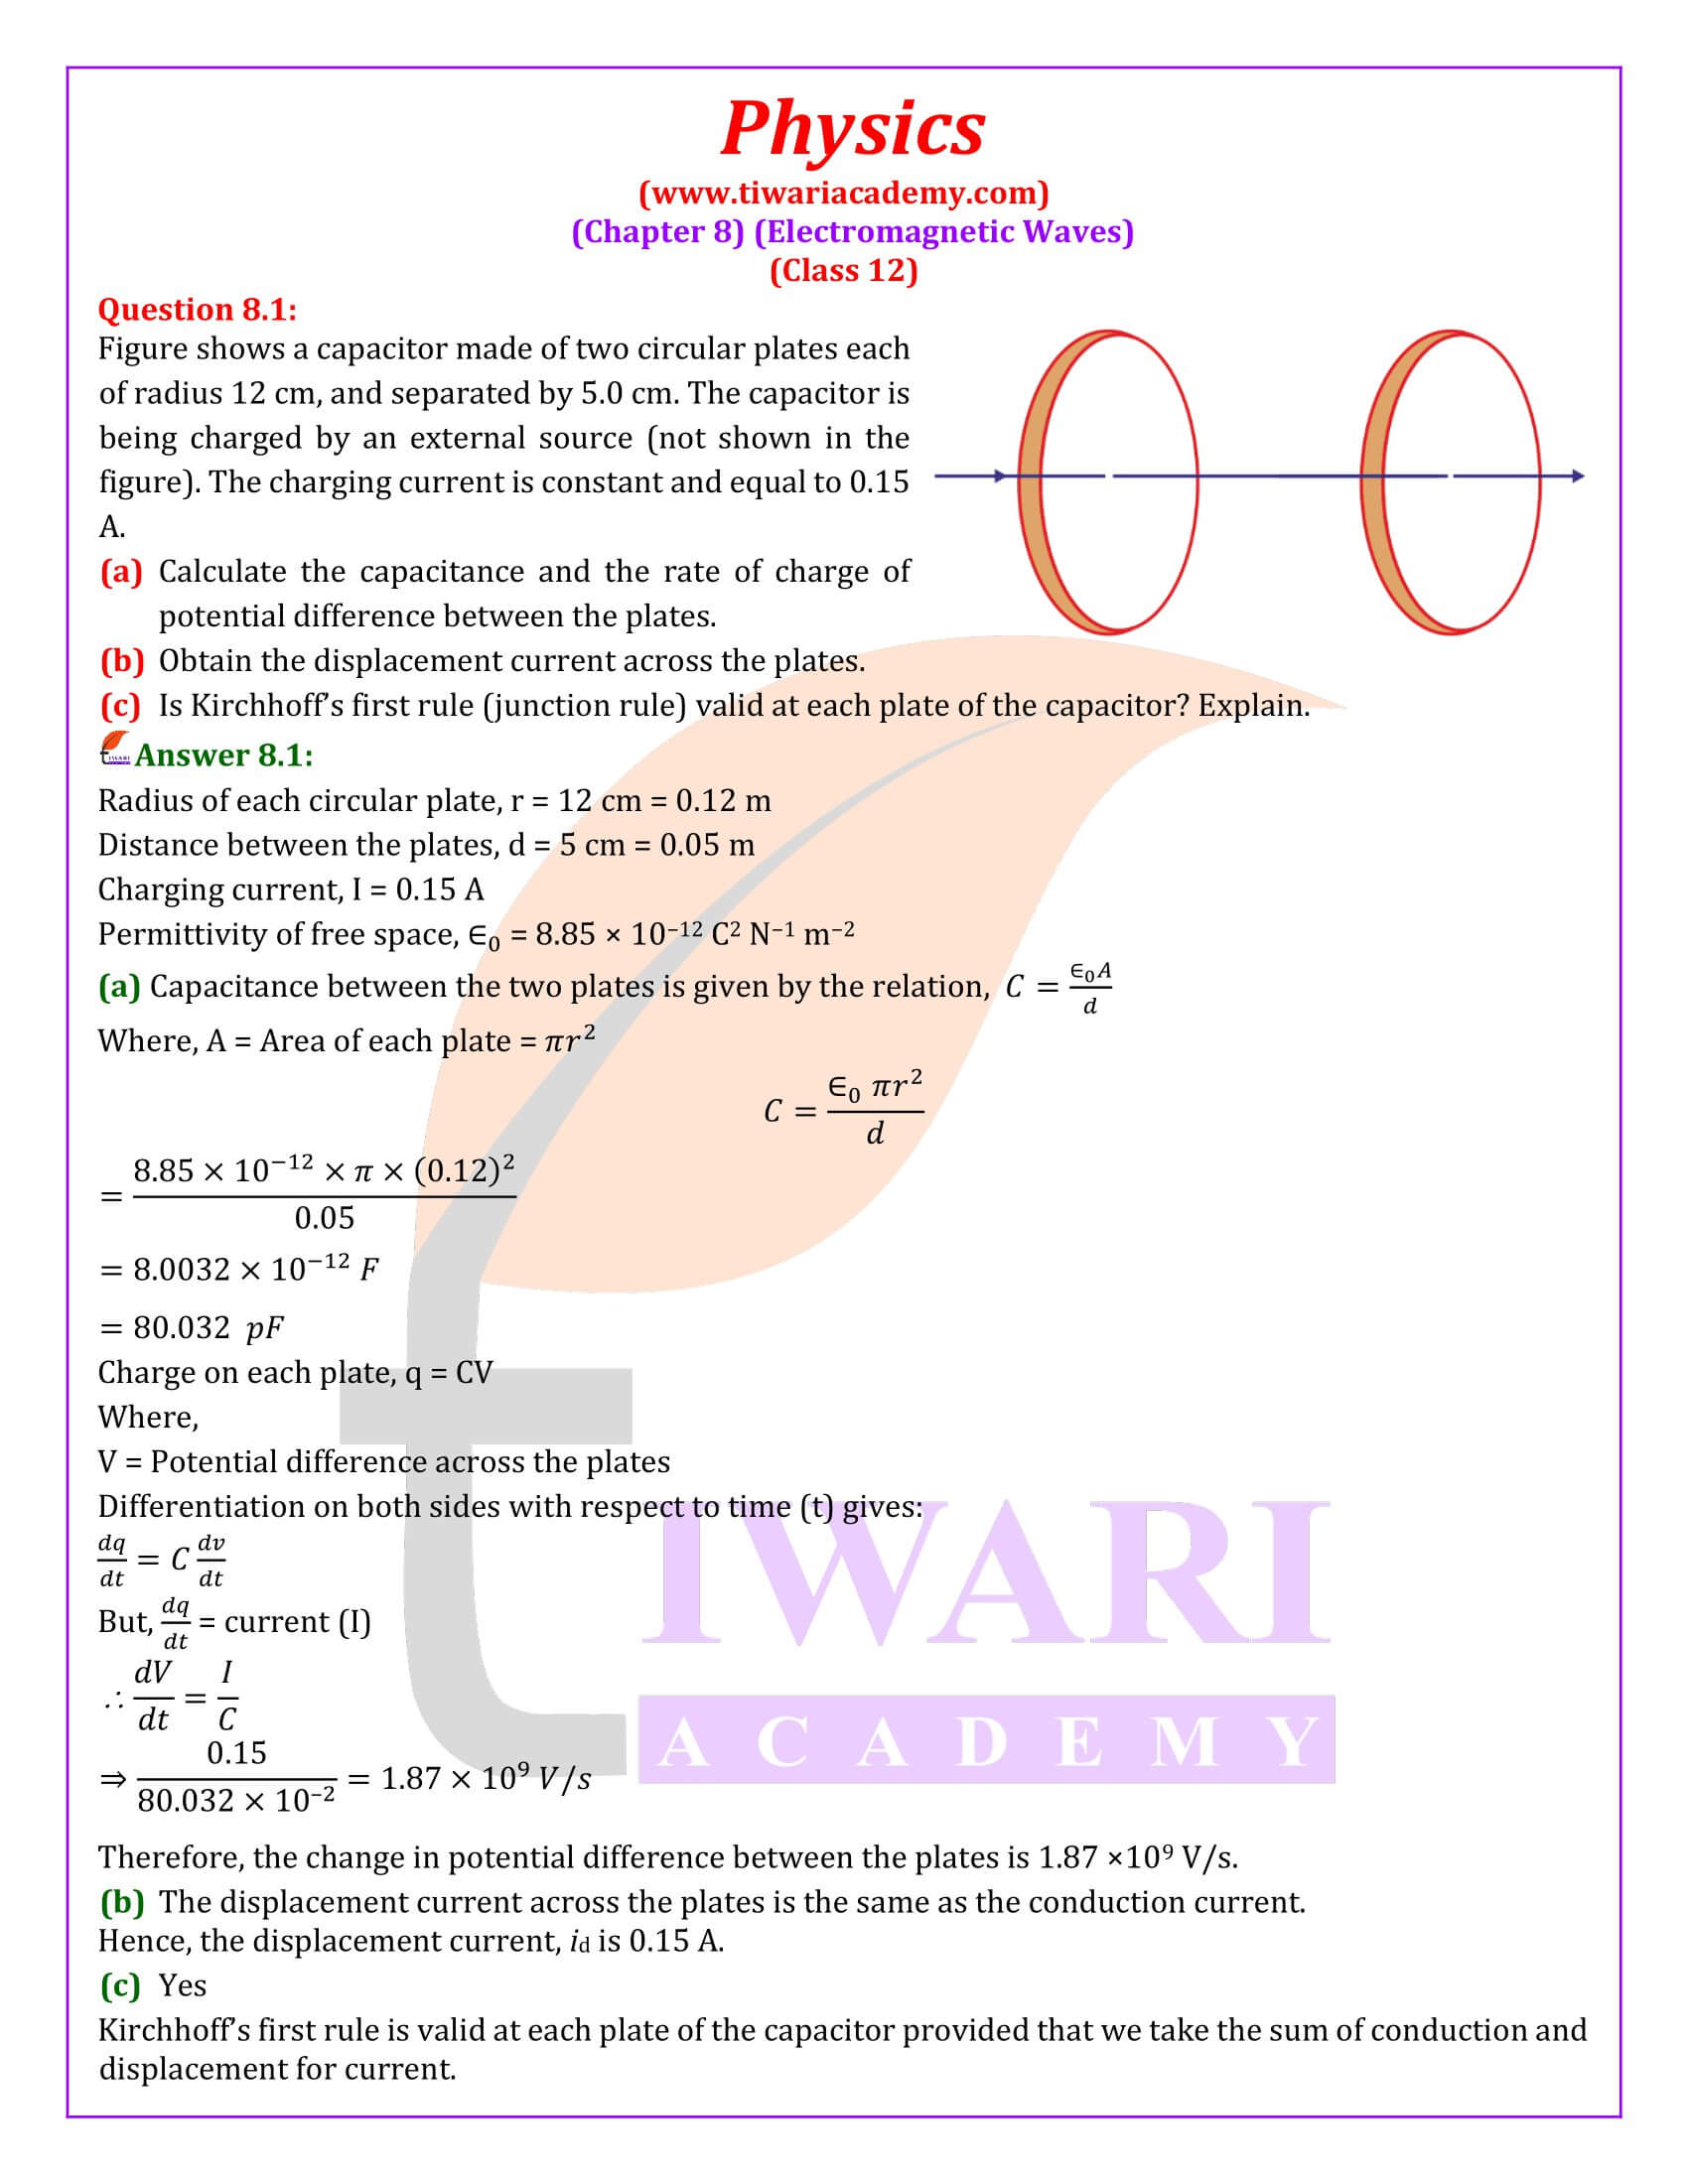 Class 12 Physics Chapter 8 Electromagnetic Waves